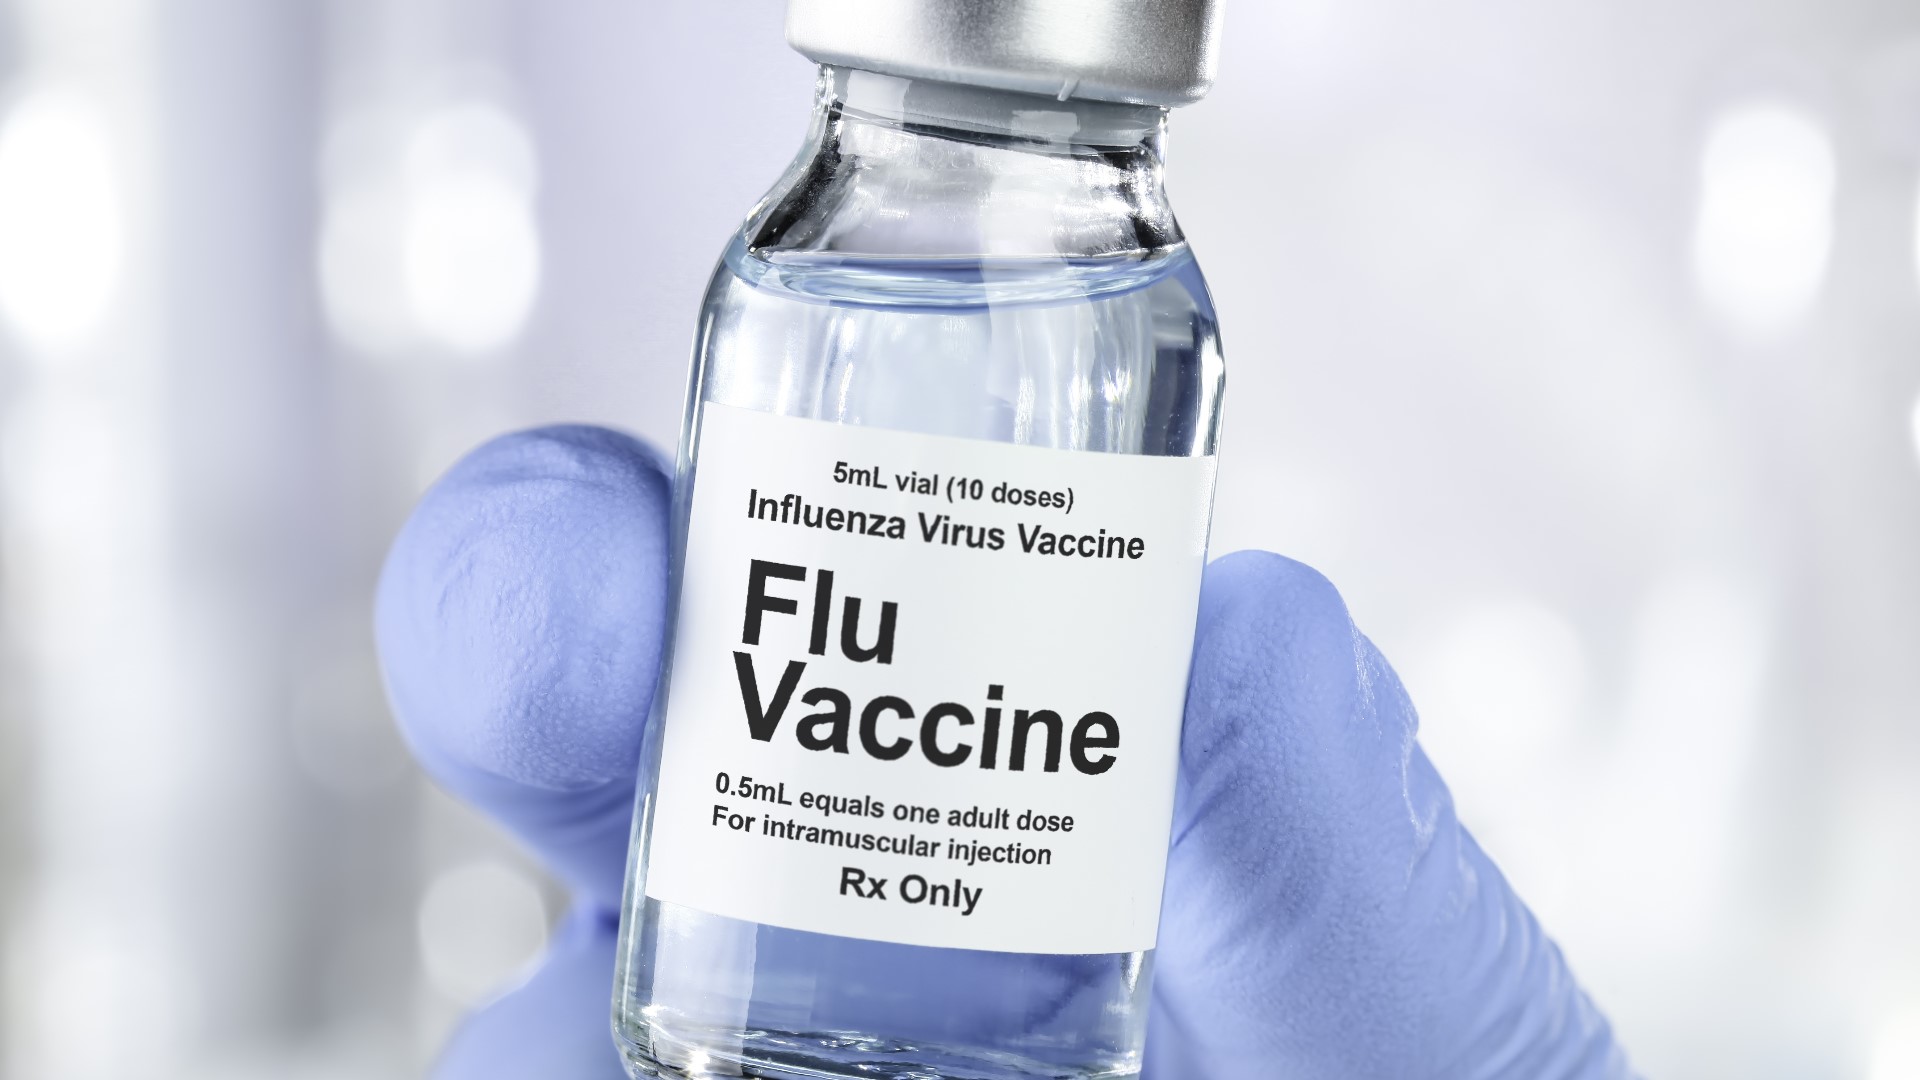 Can you get the flu from the flu vaccine? The CDC says flu vaccines cannot cause flu illness.